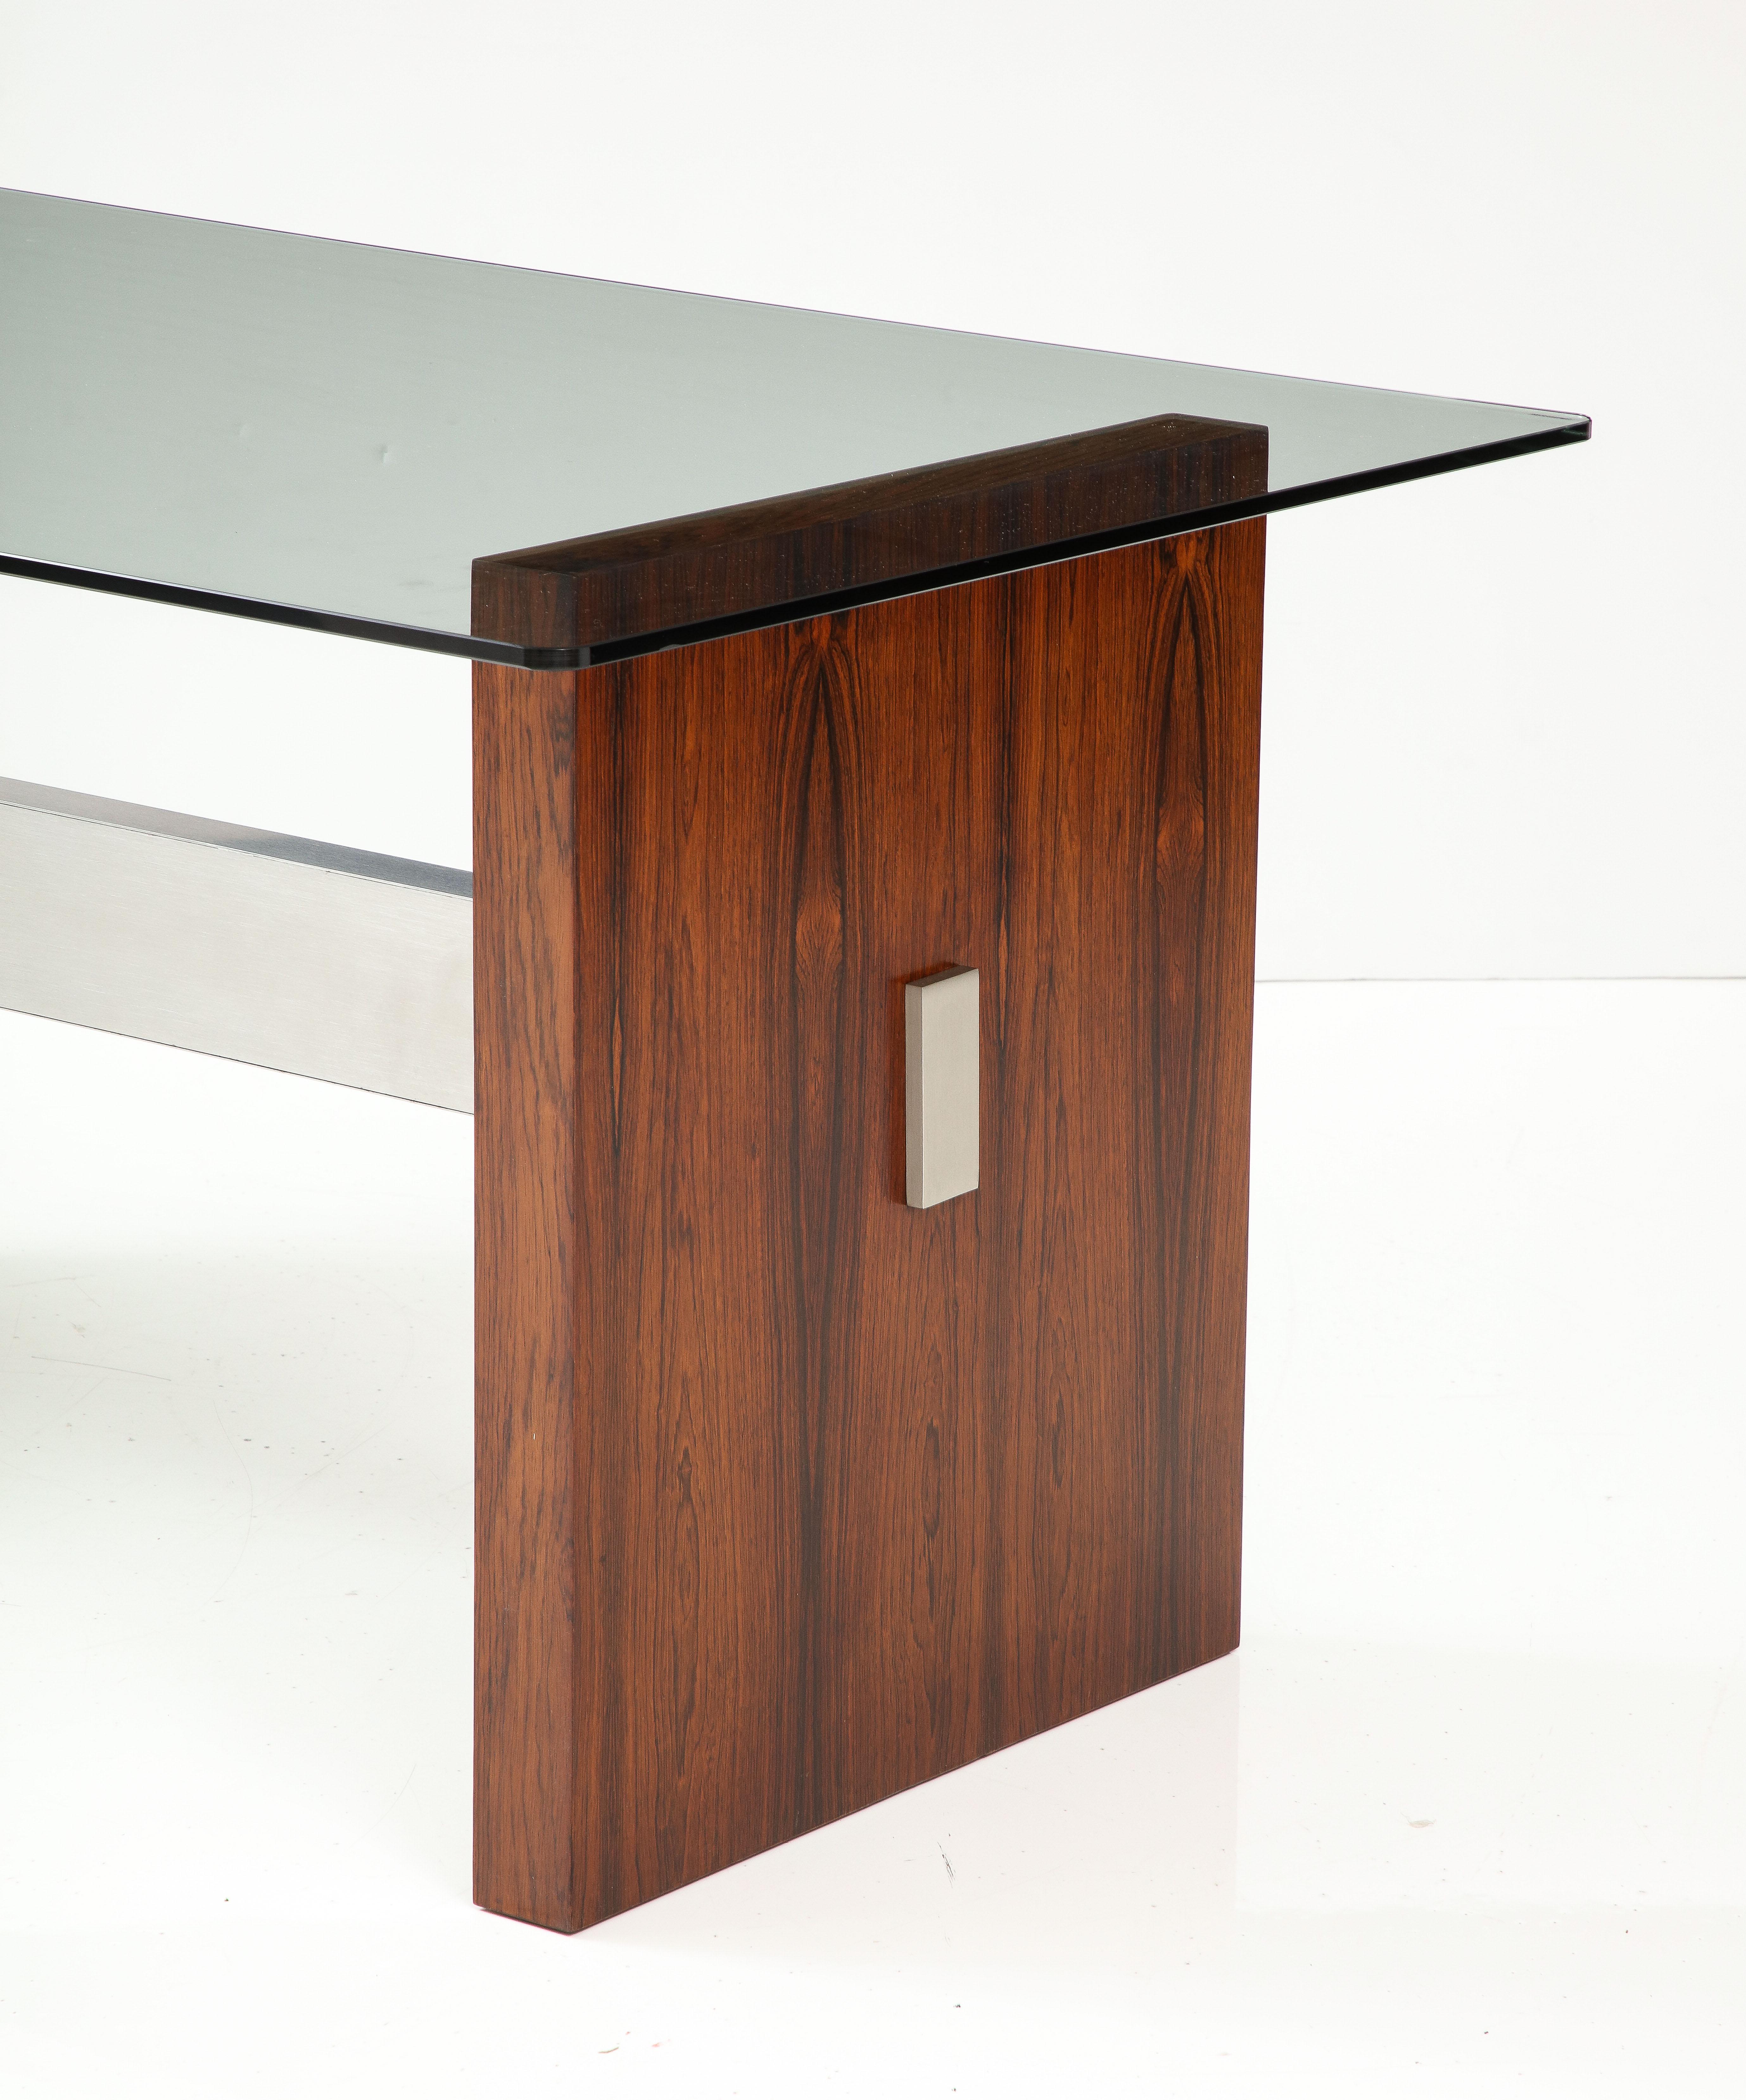 Vladimir Kagan Rosewood and Aluminum Desk/Dining Table For Sale 2